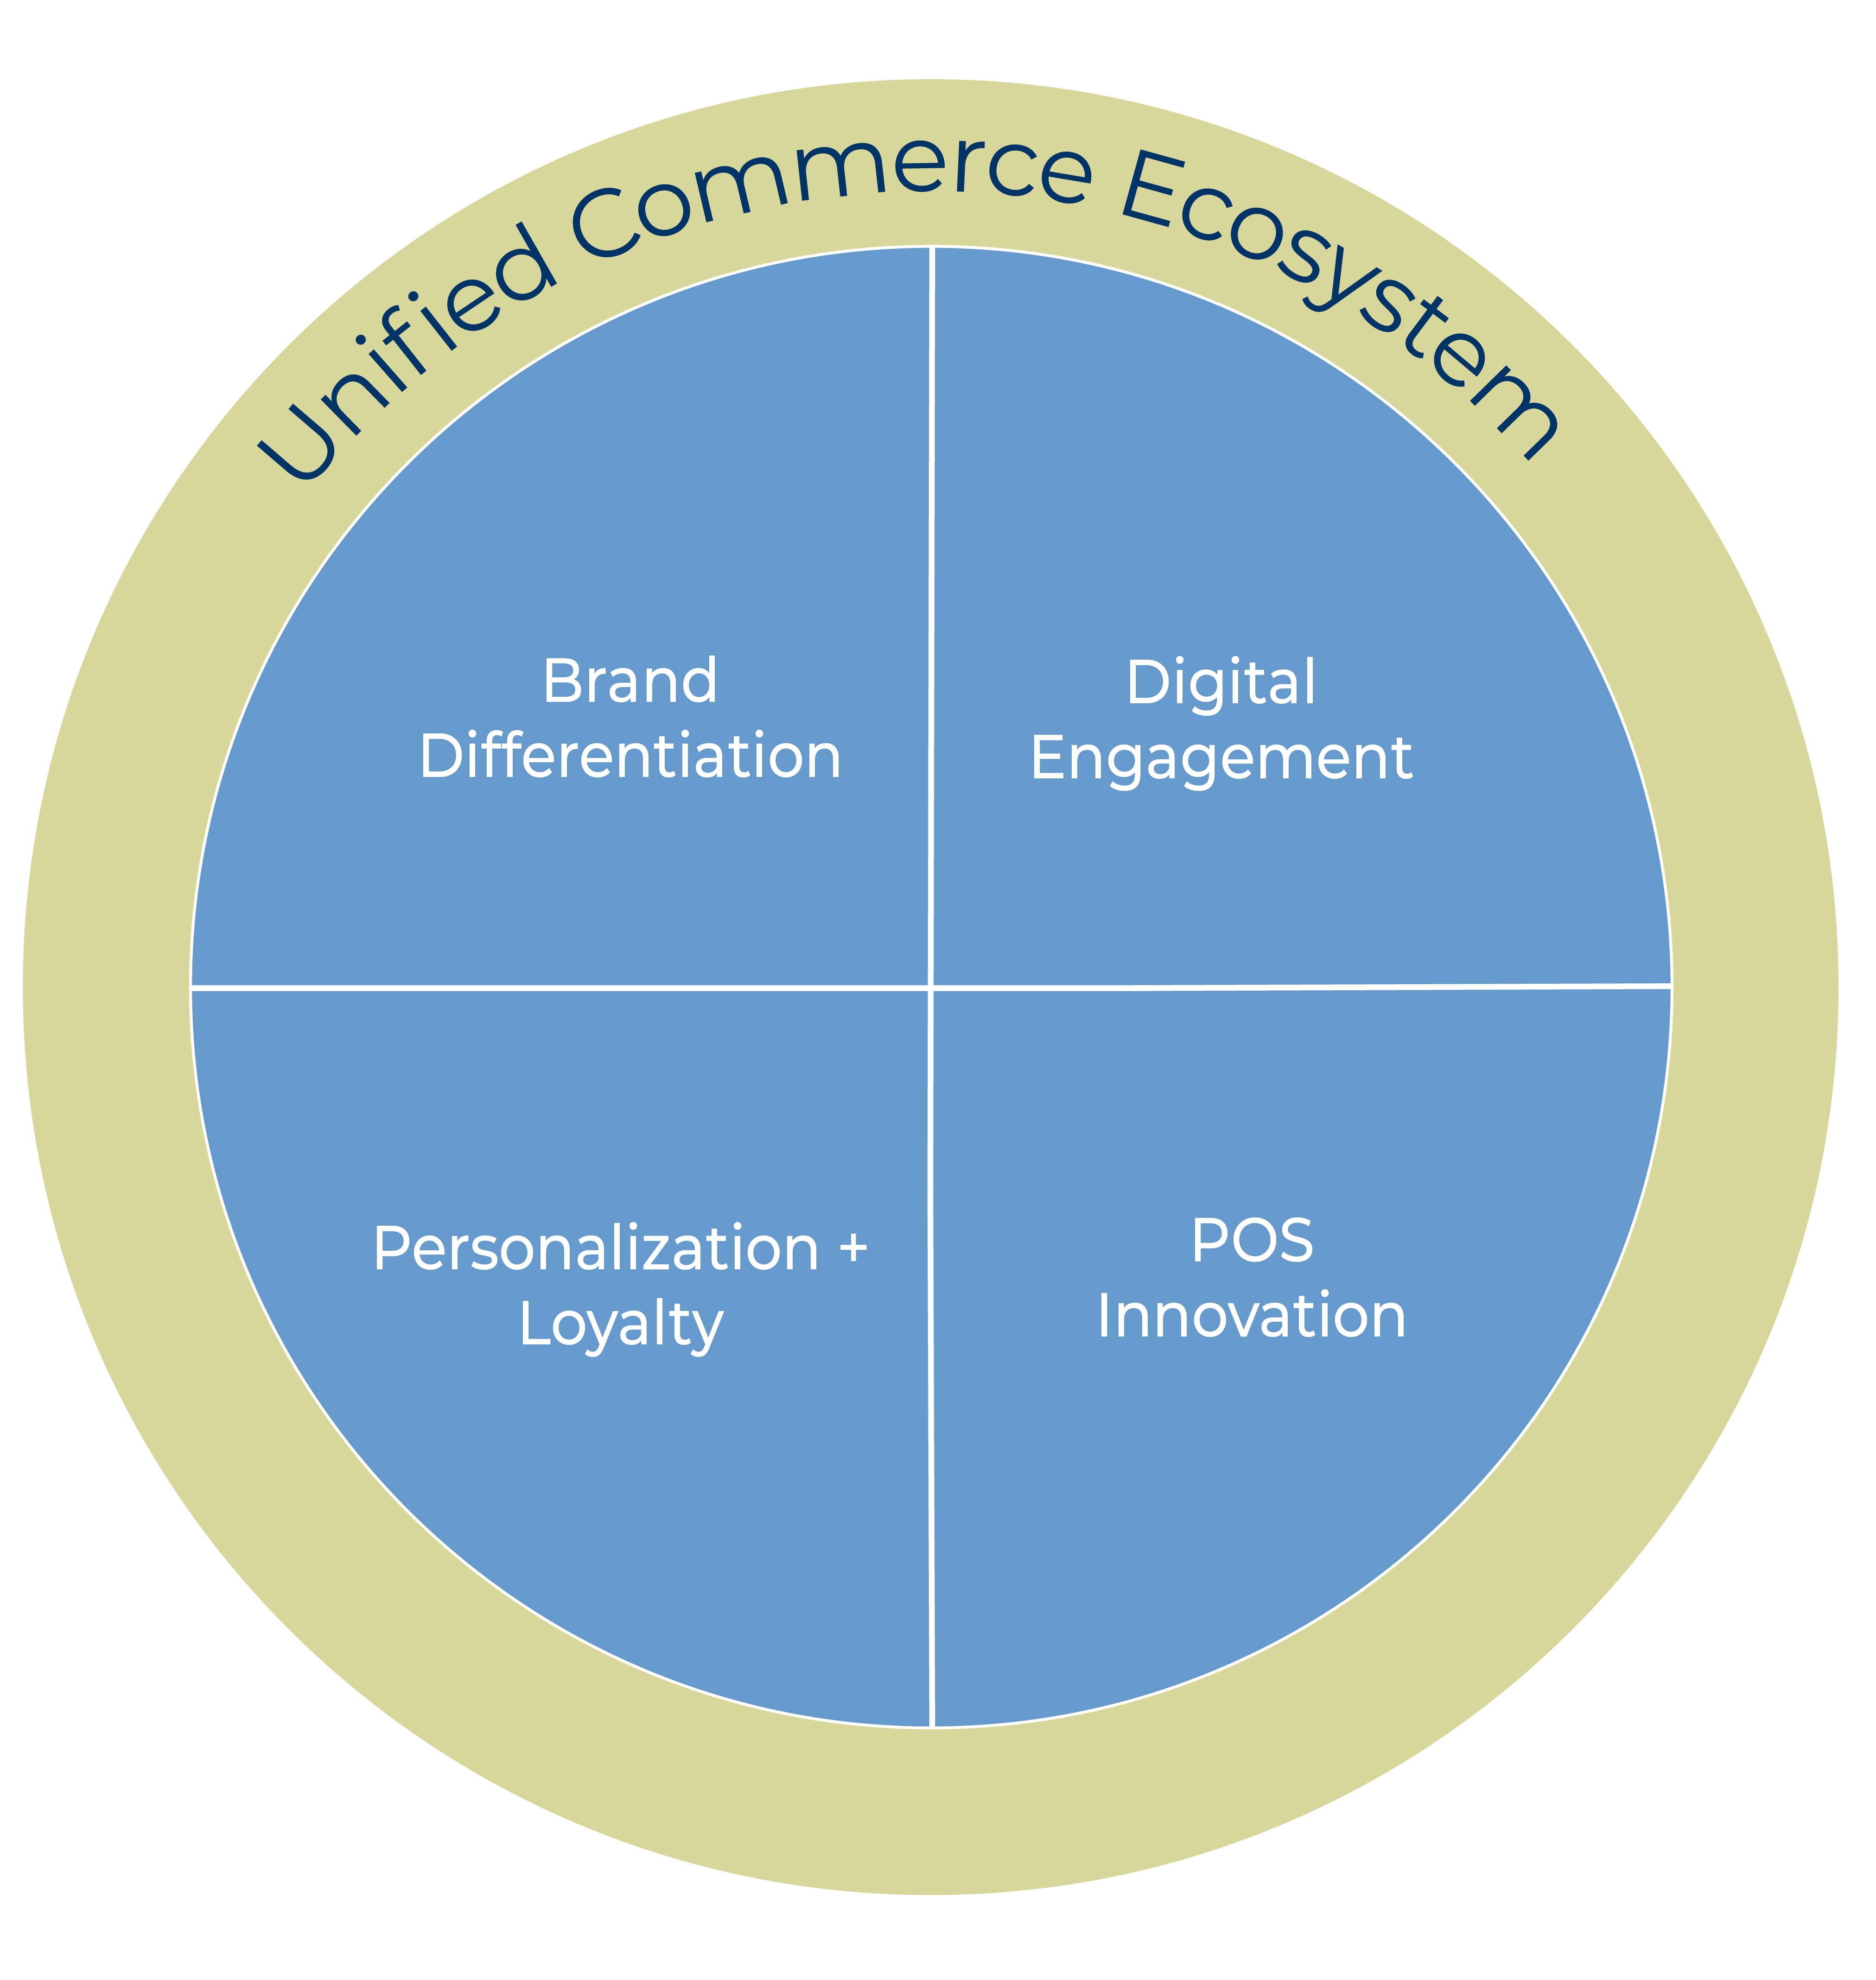 OneView Commerce delivers on the next-gen retail challenge with a unified commerce transaction engine to power engagement -- everywhere